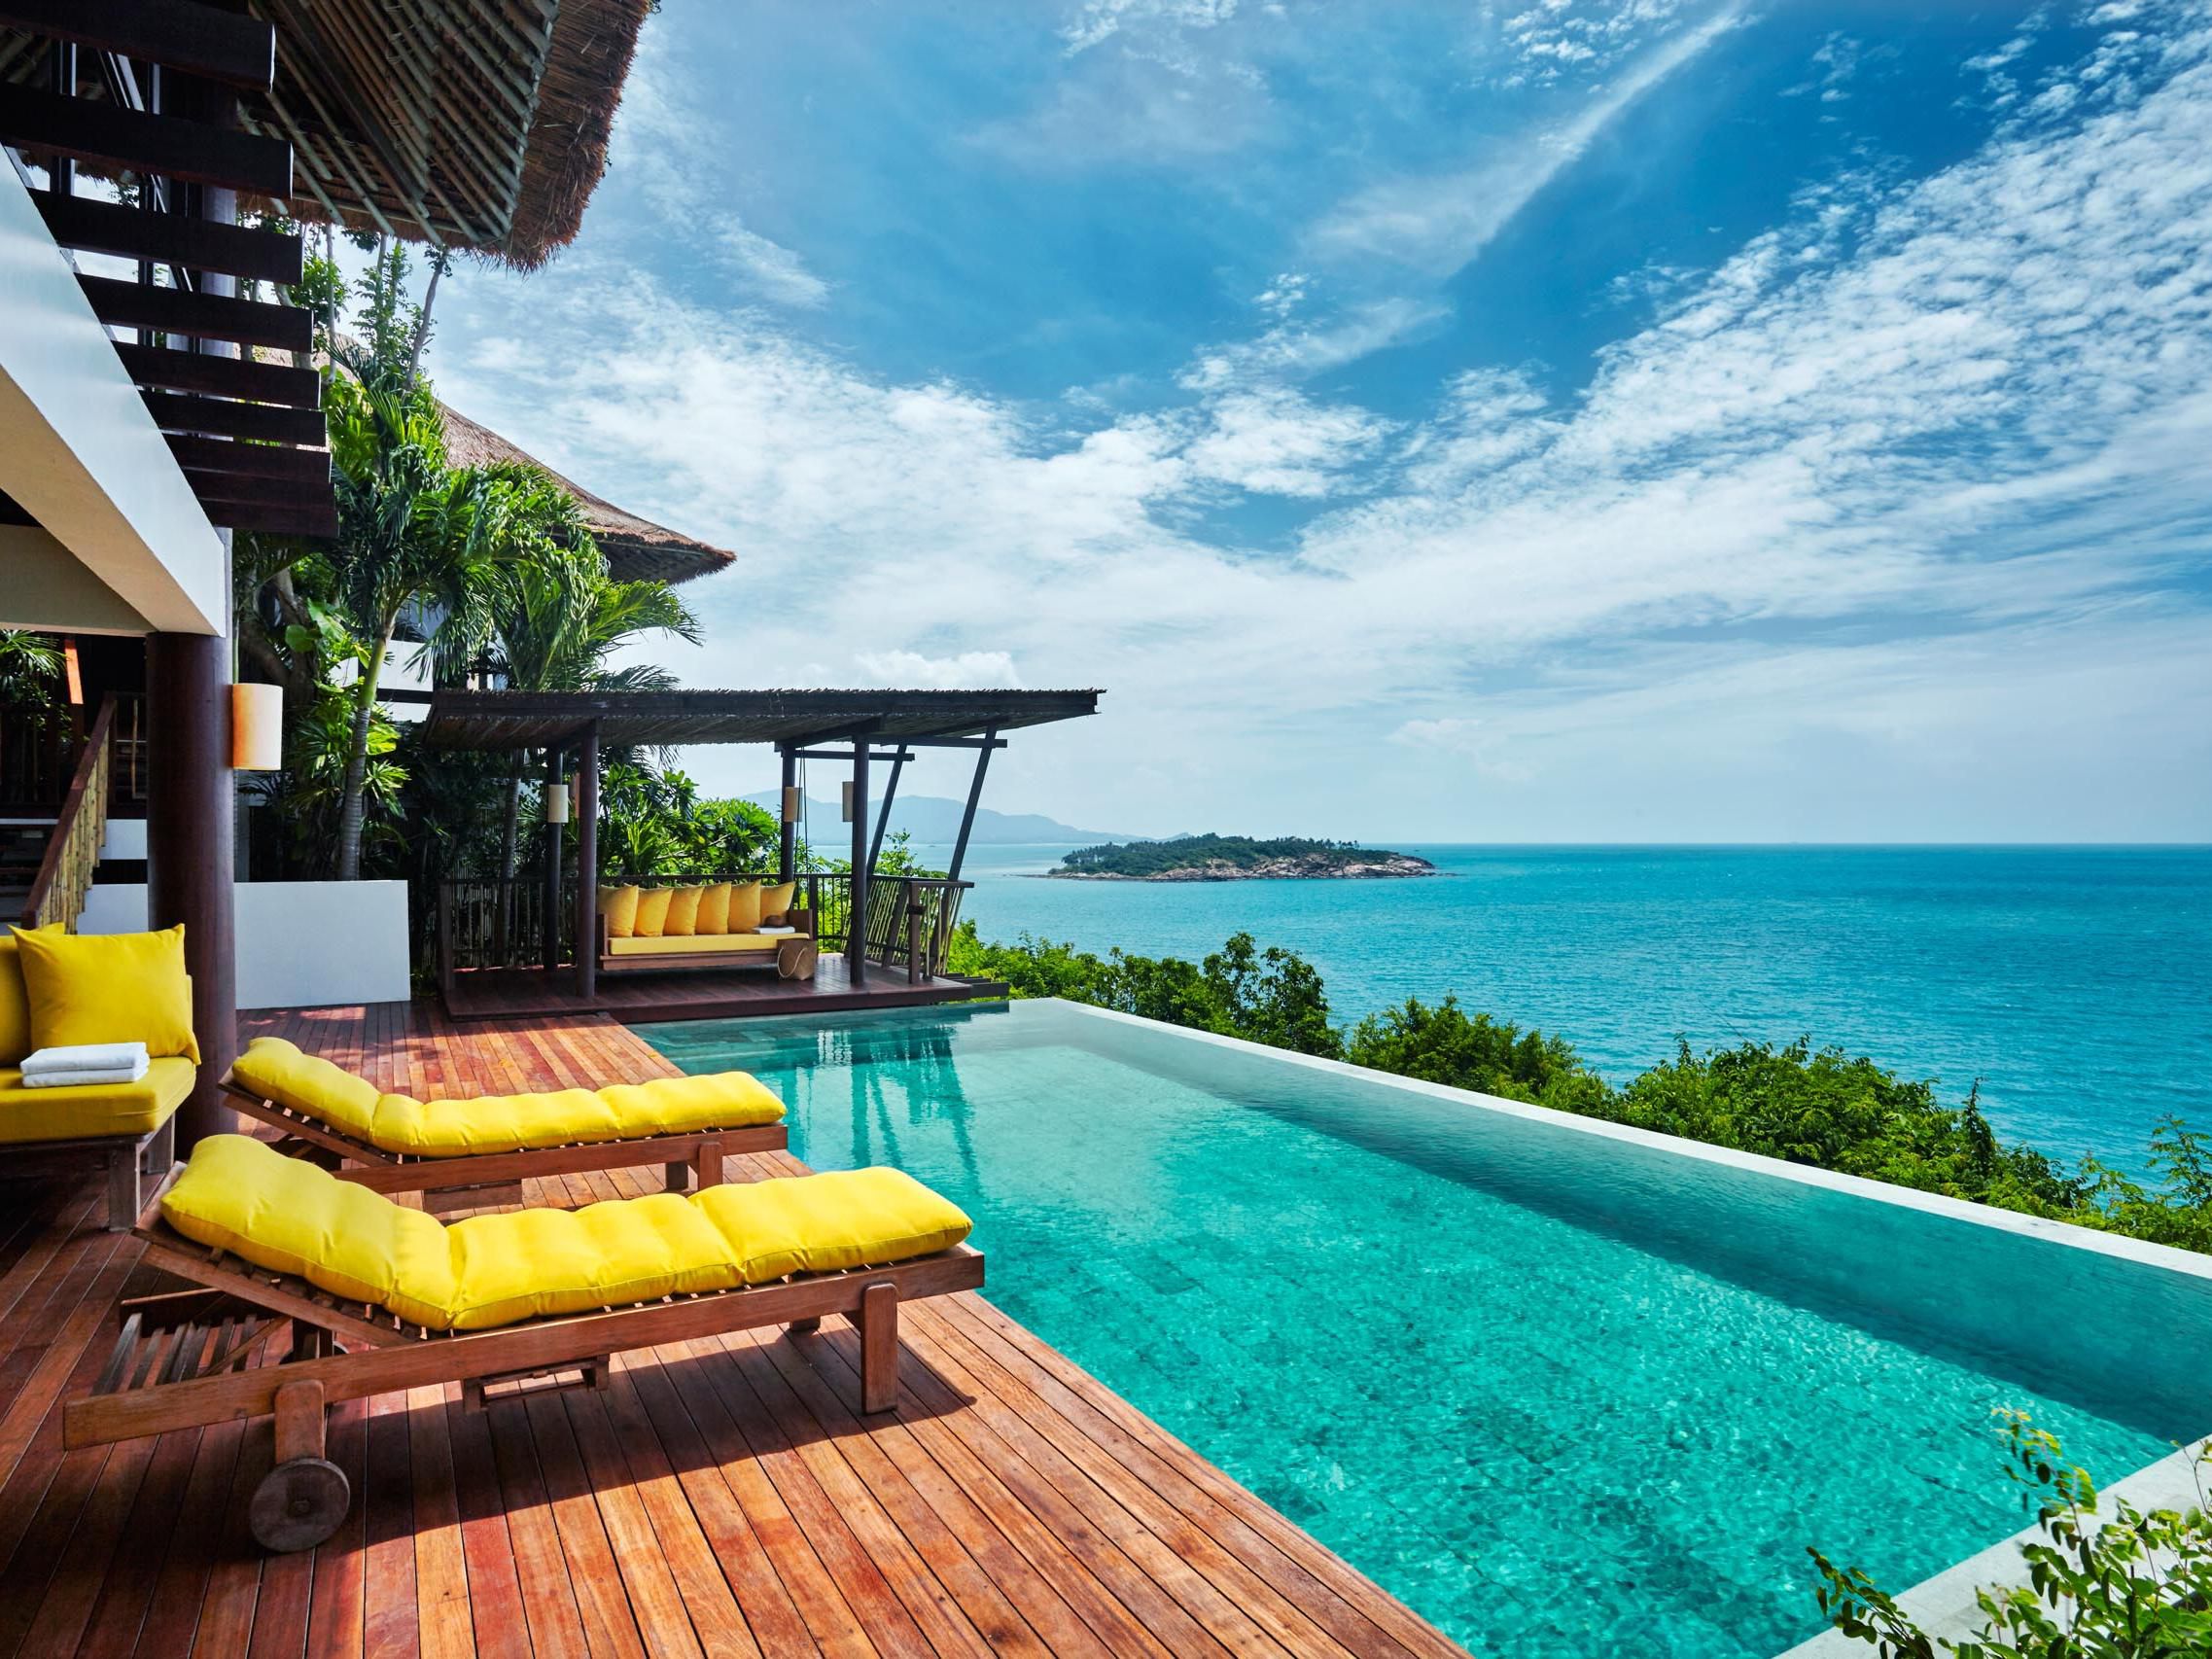 View of guest room with veranda and private plunge pool on Thailand's Koh Samui